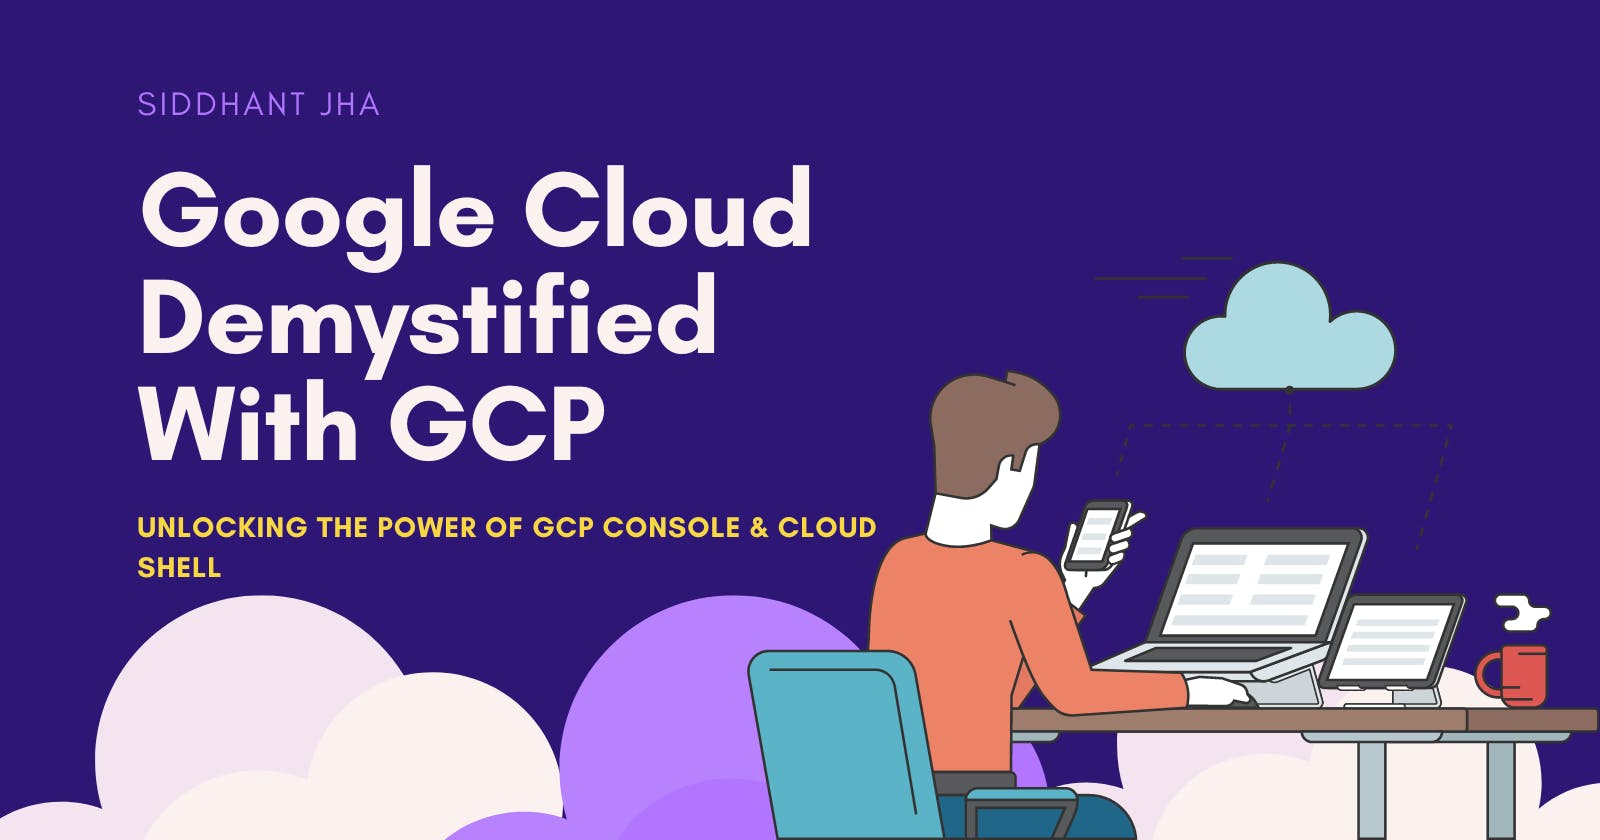 Google Cloud Demystified With GCP: Unlocking the Power of GCP Console & Cloud Shell